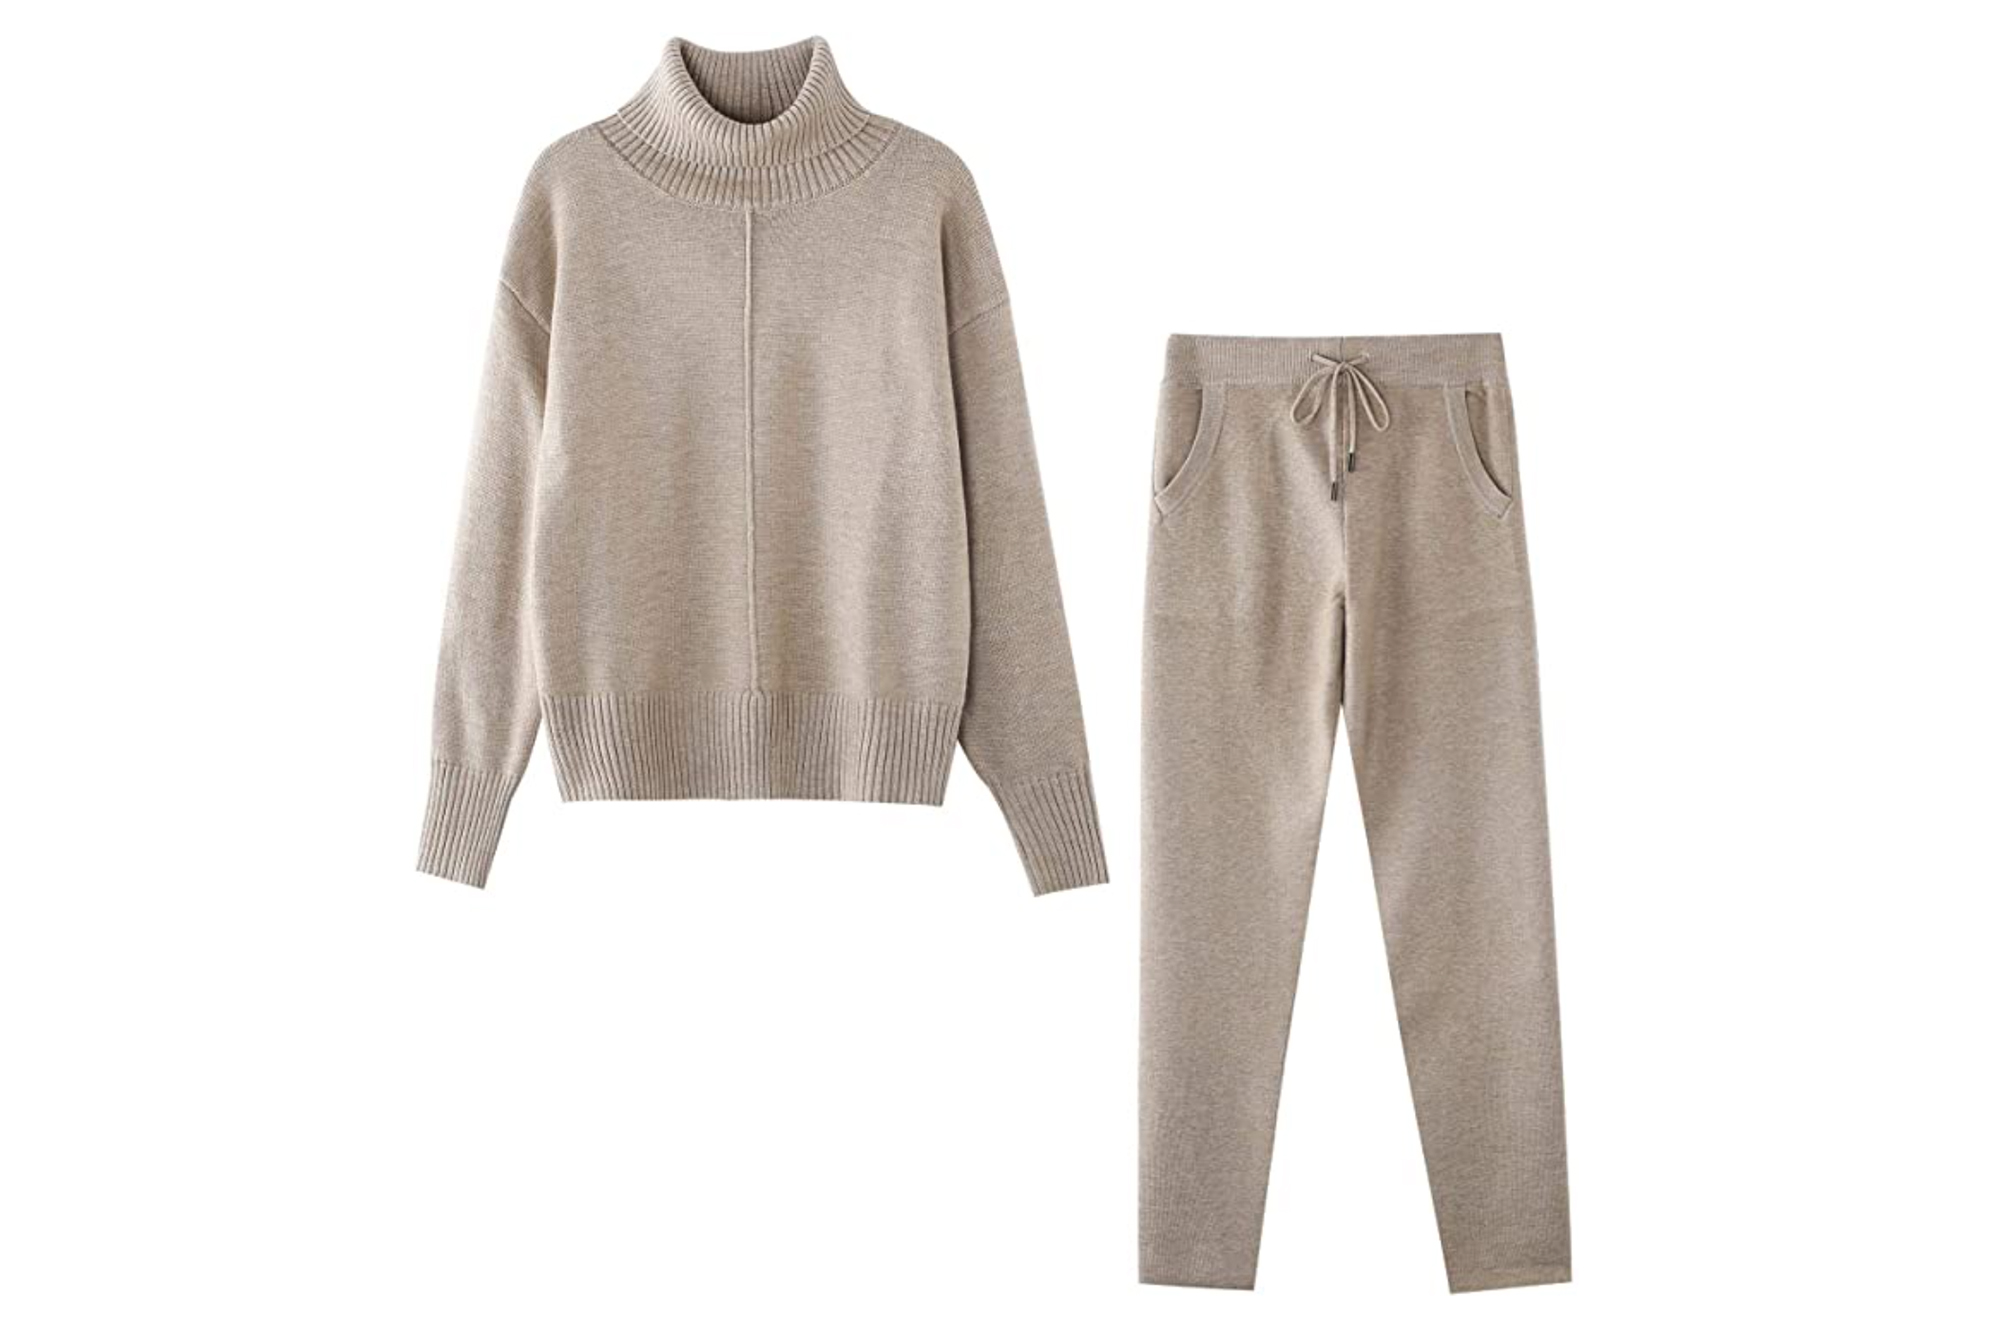 TAOVK 2-Piece Sweater Set Is Perfect for Cold Winter Nights